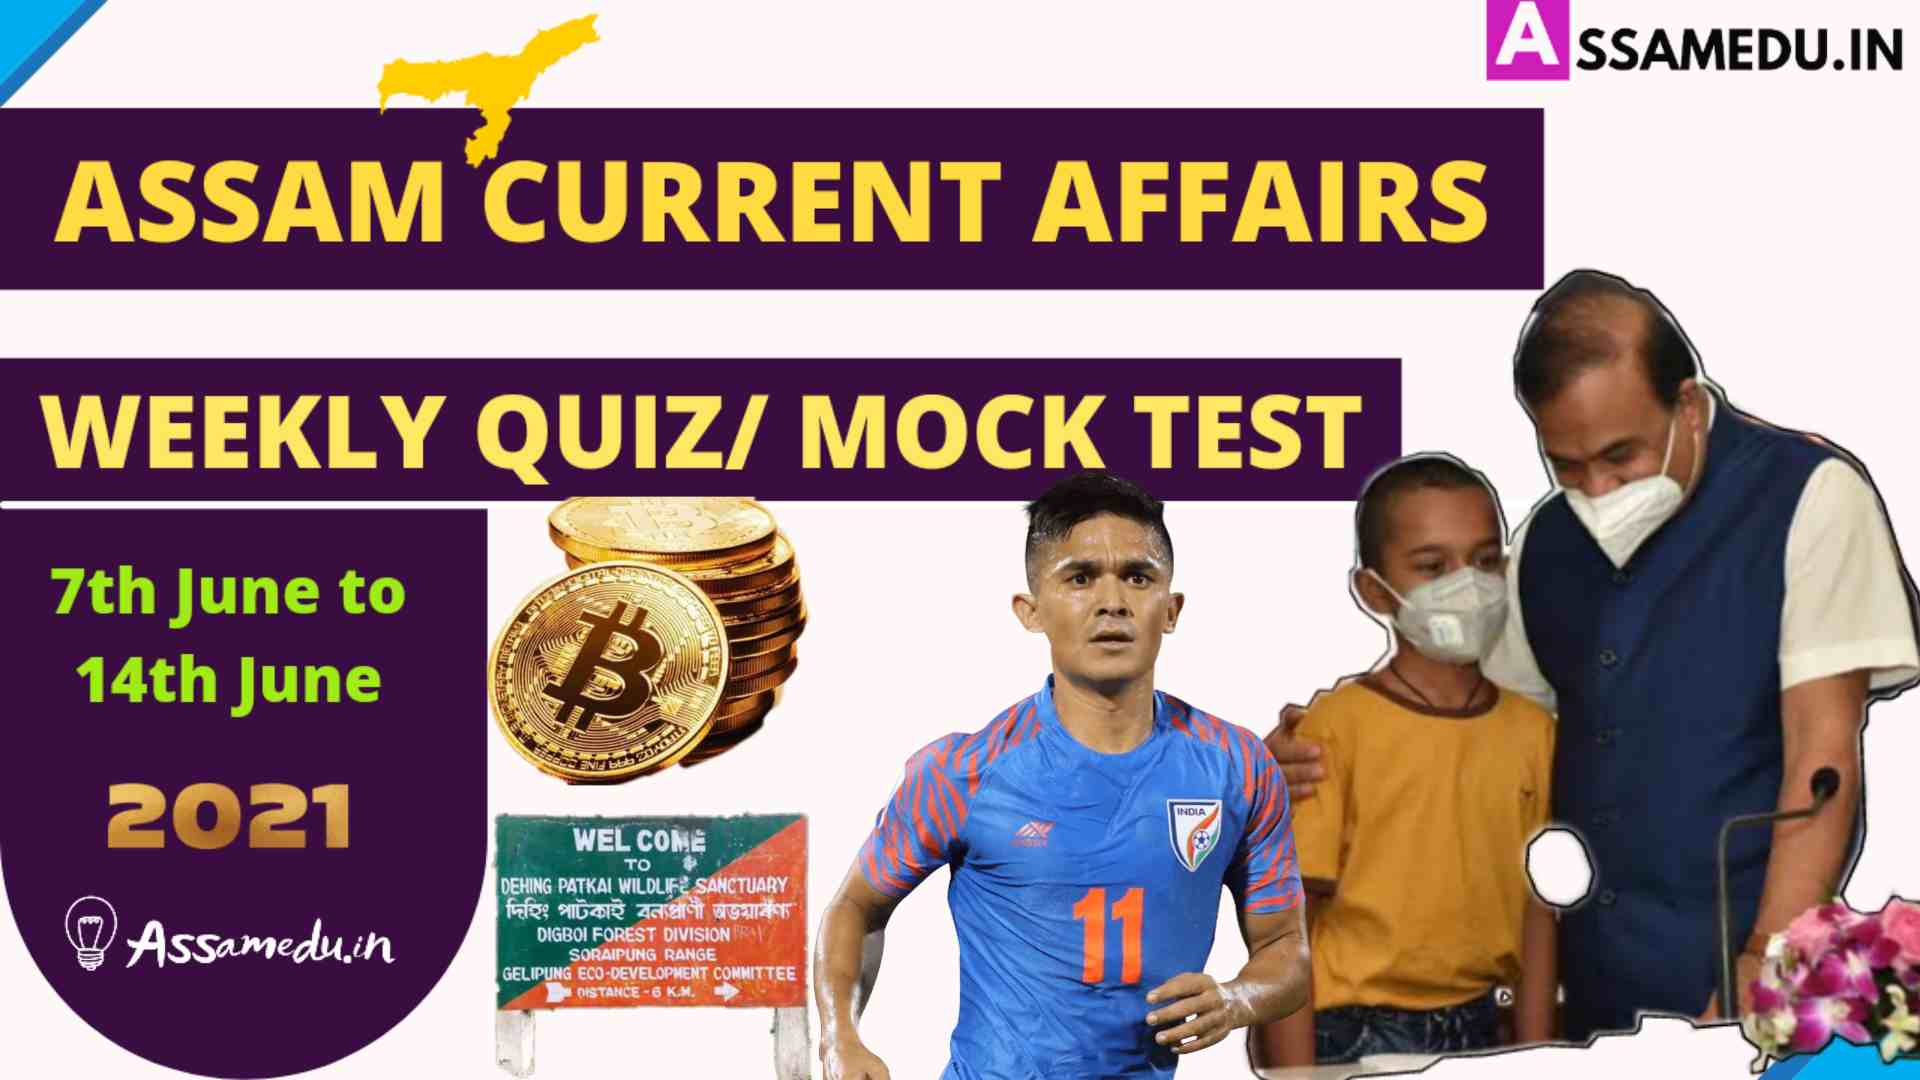 Assam Current affairs Weekly mock test